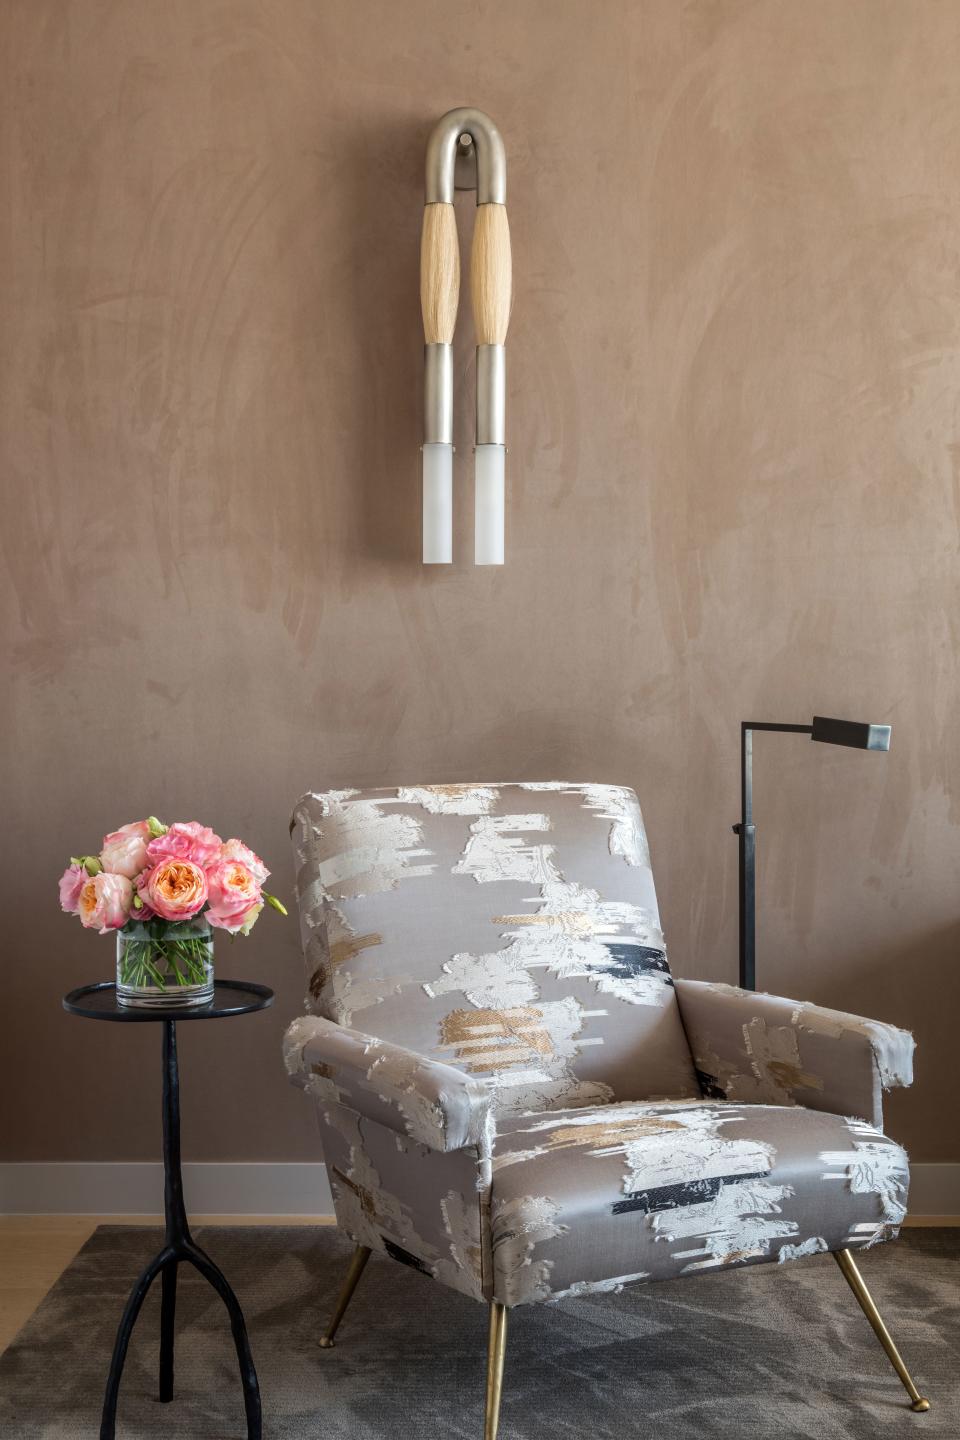 To create a glam moment that doesn’t upstage the bedroom’s coziness, Korban upholstered a vintage chair from Flair in New York with deconstructed Dedar fabric. An Apparatus Studio sconce doubles as artwork above a task lamp from Vaughan Designs and a side table by Liaigre.